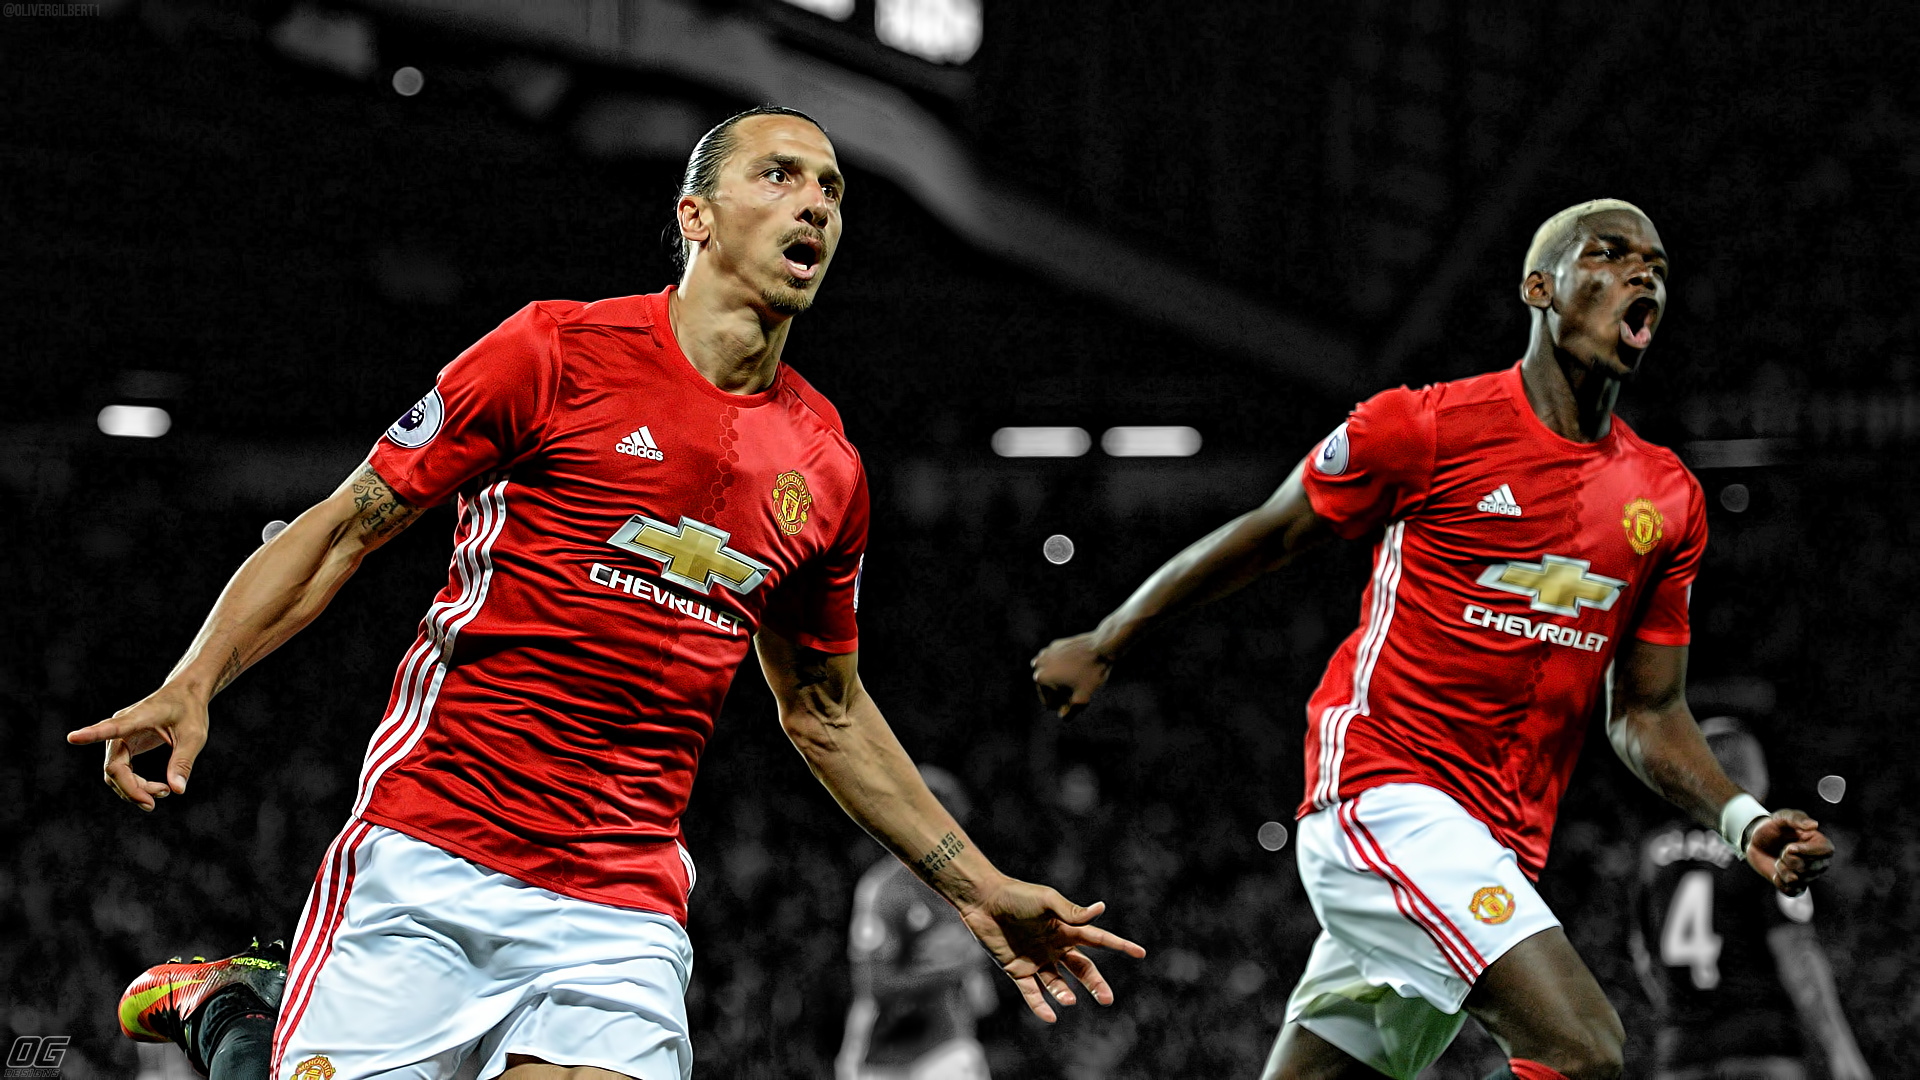 Manchester United, Star players in action, Football perfection, Widescreen wallpapers, 1920x1080 Full HD Desktop